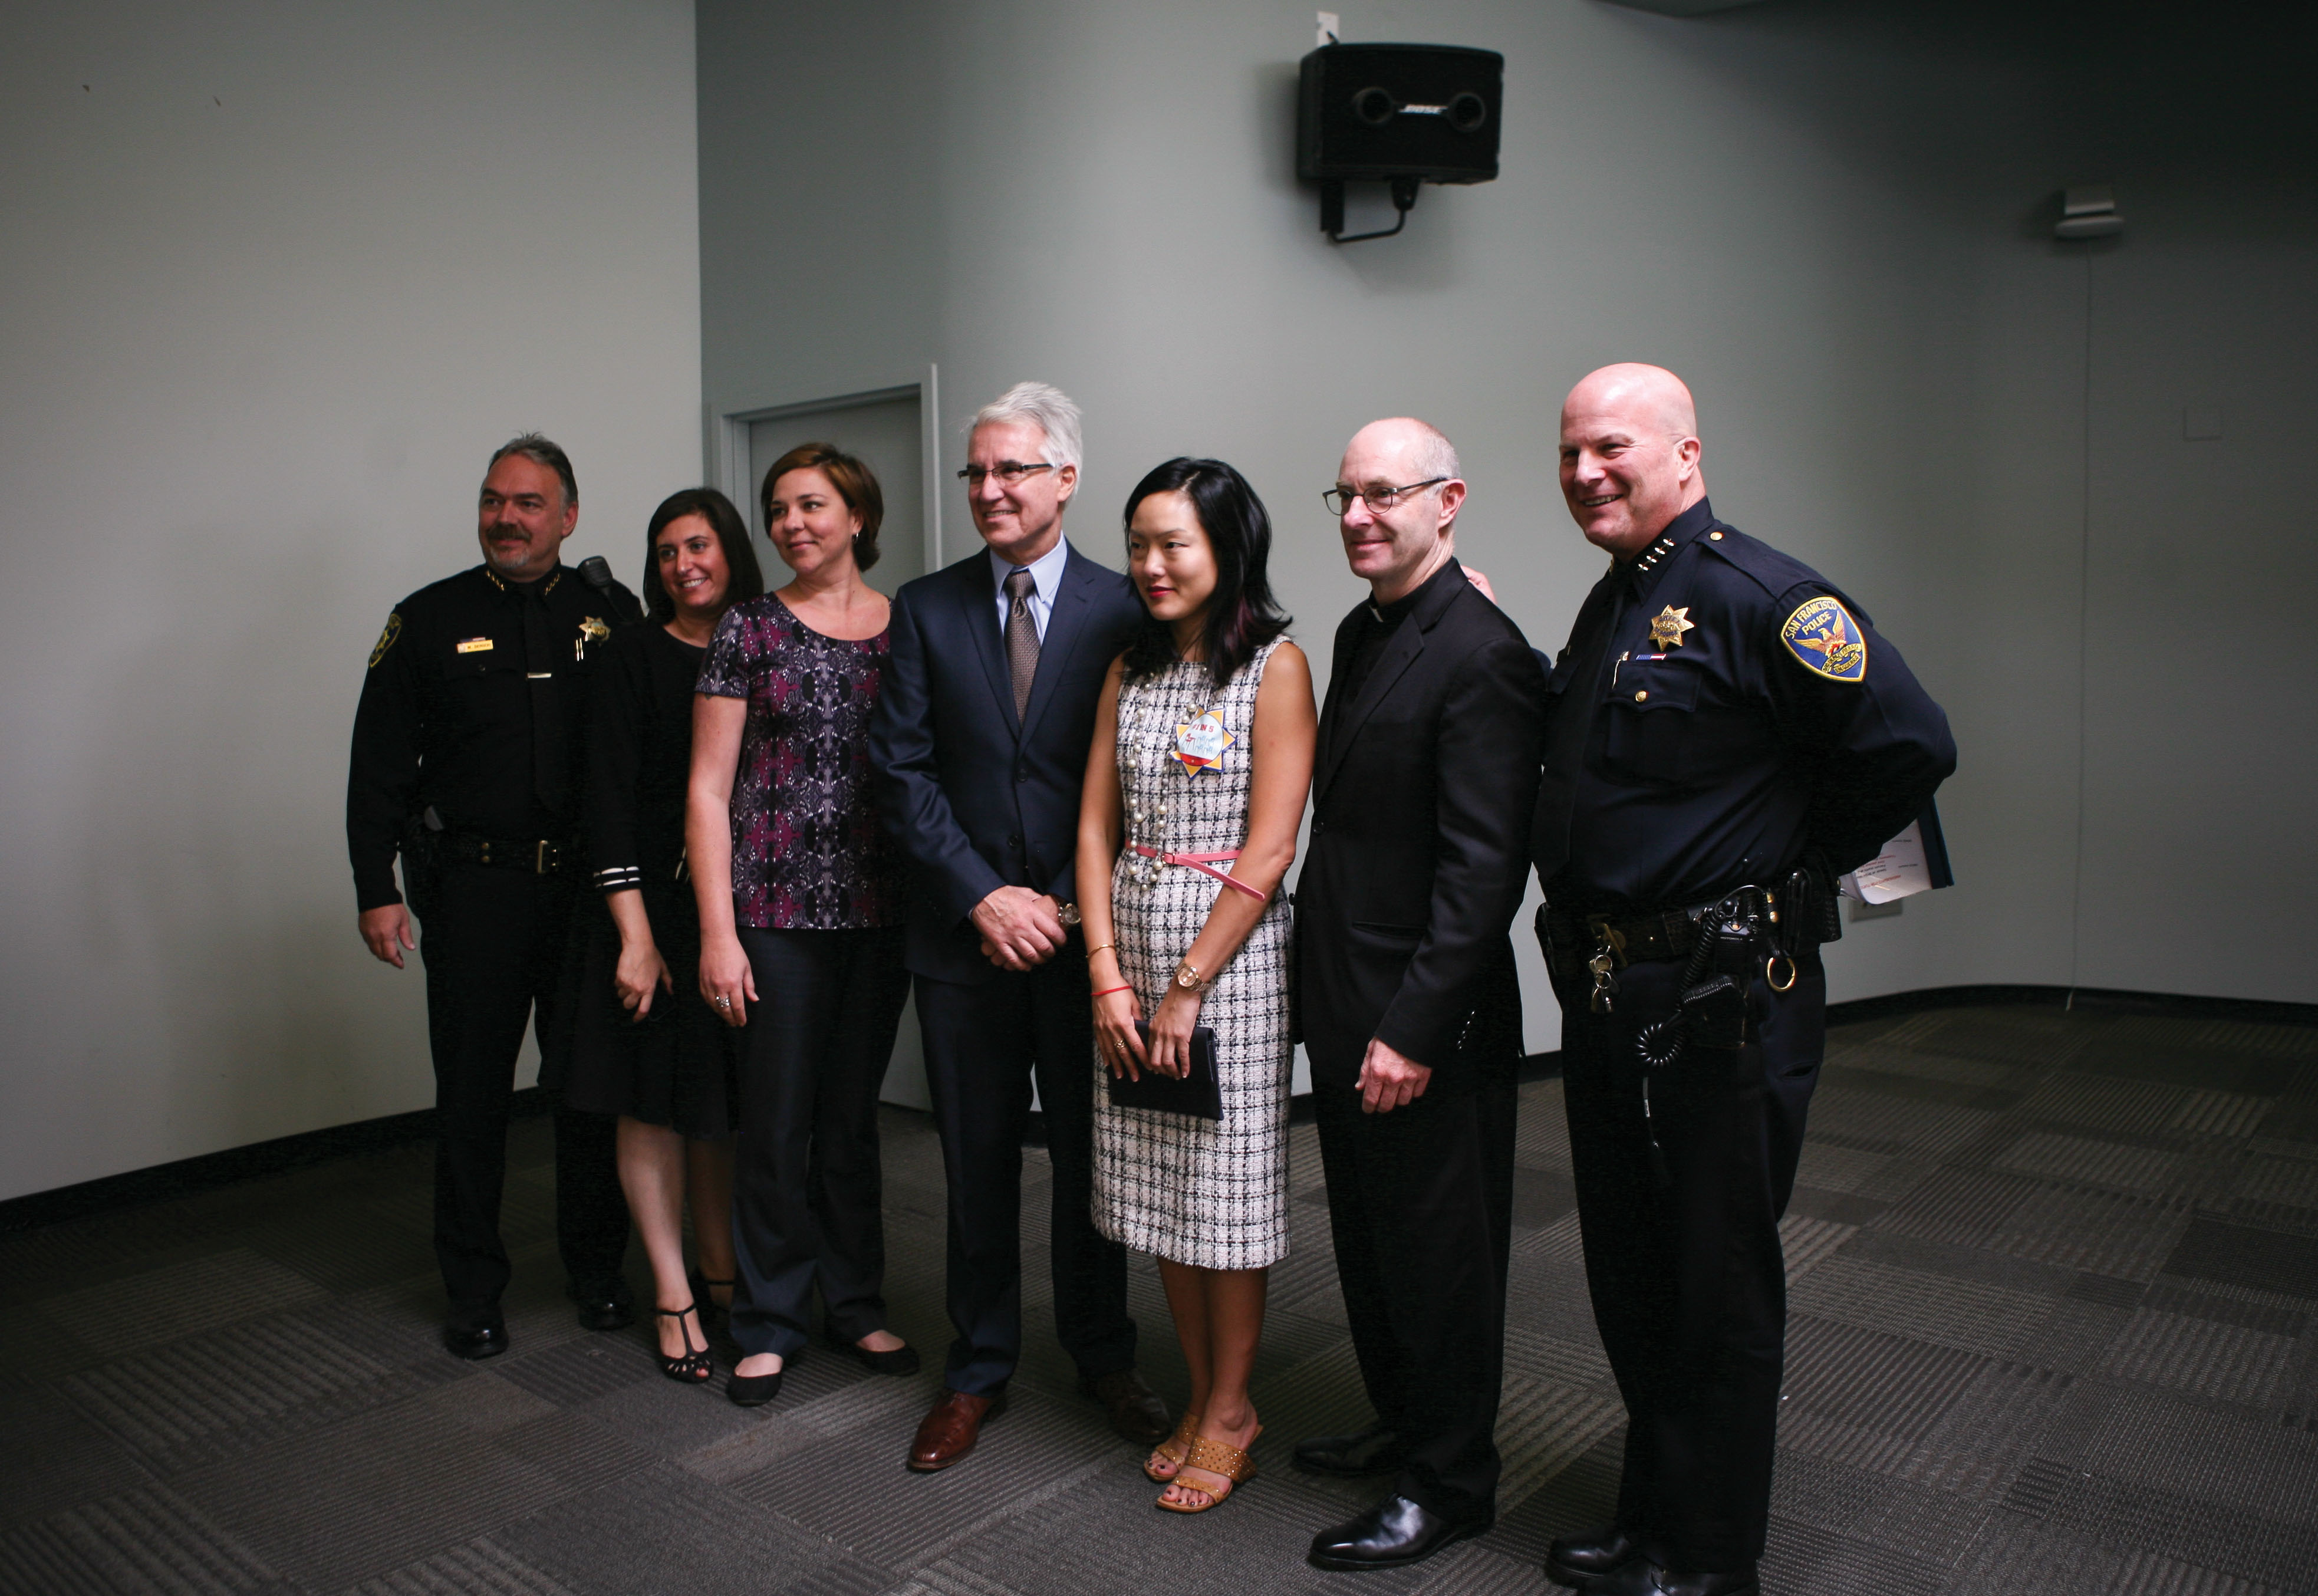 (L-R) UCSF police chief Mike Denson, USF interim vice provost of student life Julie Orio, USF Title IX coordinator Anne Bartkowski, District Attorney George Gascon, Supervisor Jane Kim, USF President Paul Fitzgerald, and SF Police Chief Greg Suhr gather for a group photo after a press conference about a new program to combat sexual assault on college campuses in SF. (Photo by Anna Vignet/Contributor)